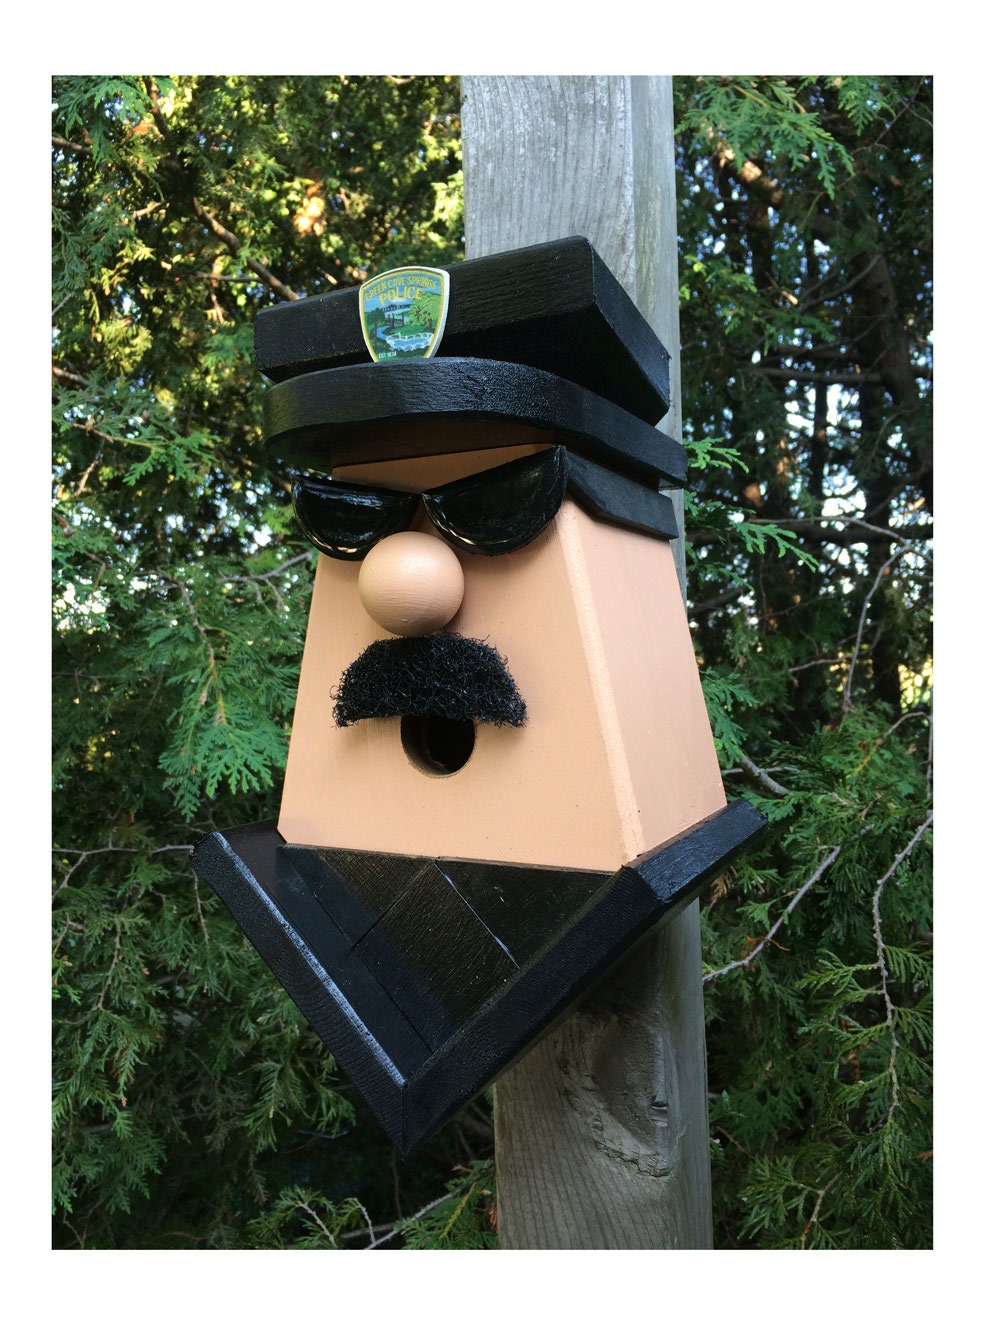 Personalized Police Officer with Moustache and Sunglasses Birdhouse